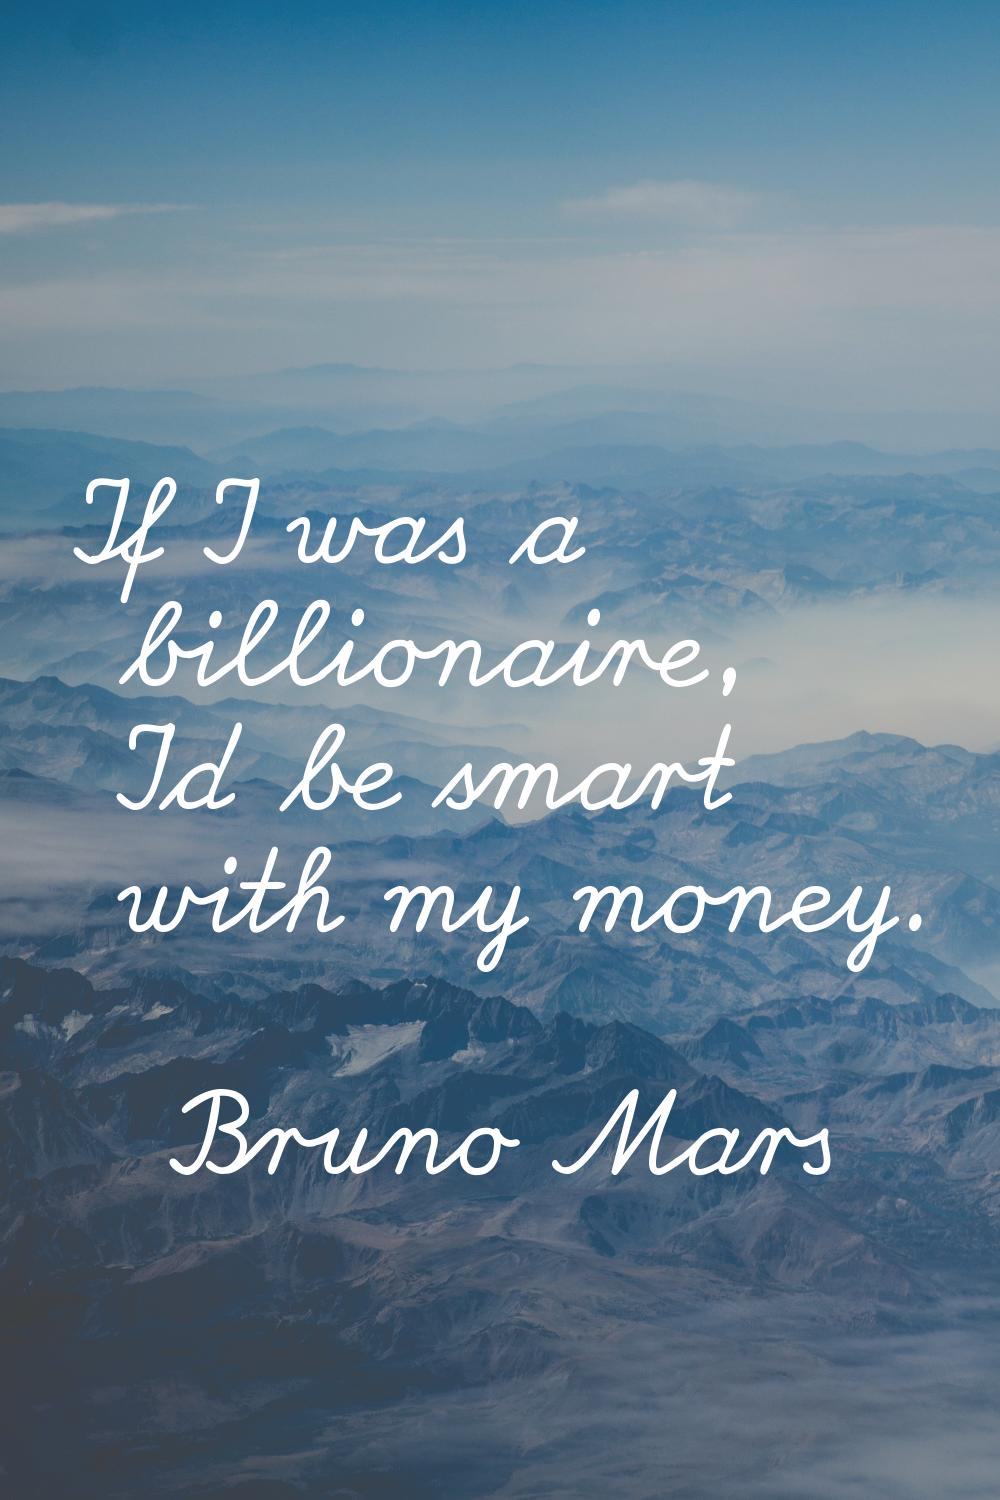 If I was a billionaire, I'd be smart with my money.